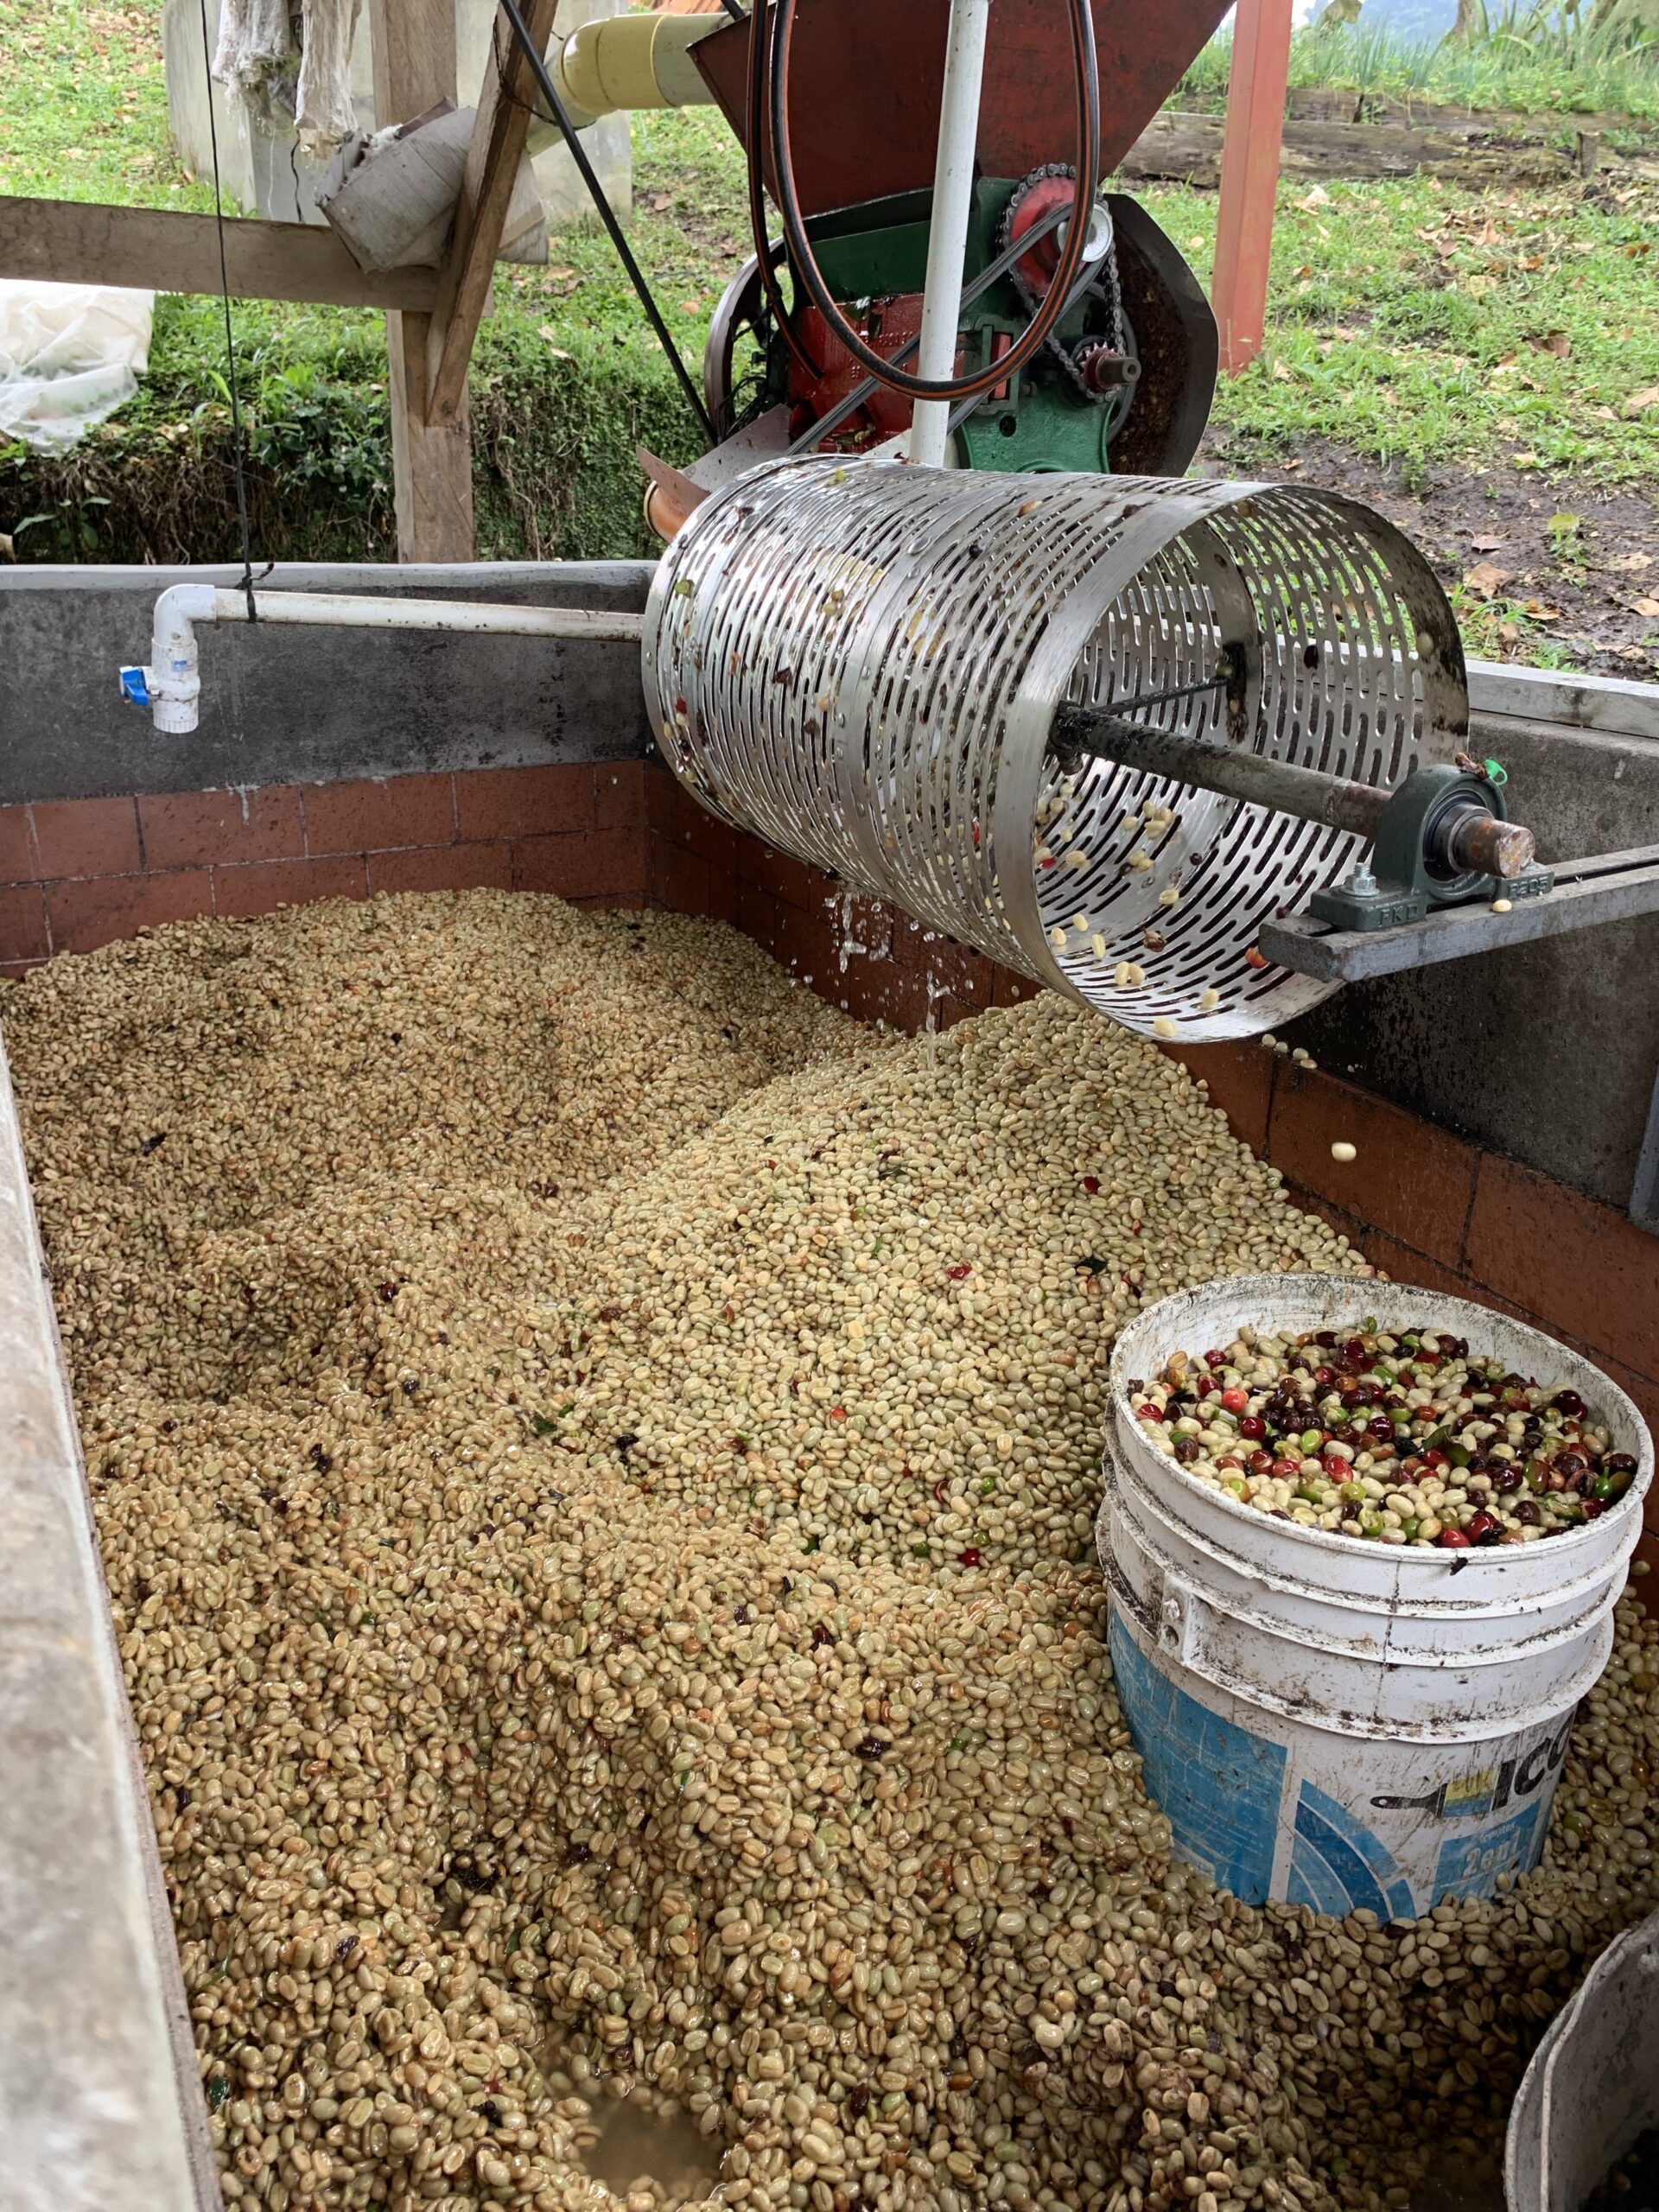 Minimizing water usage by separating beans early in the process